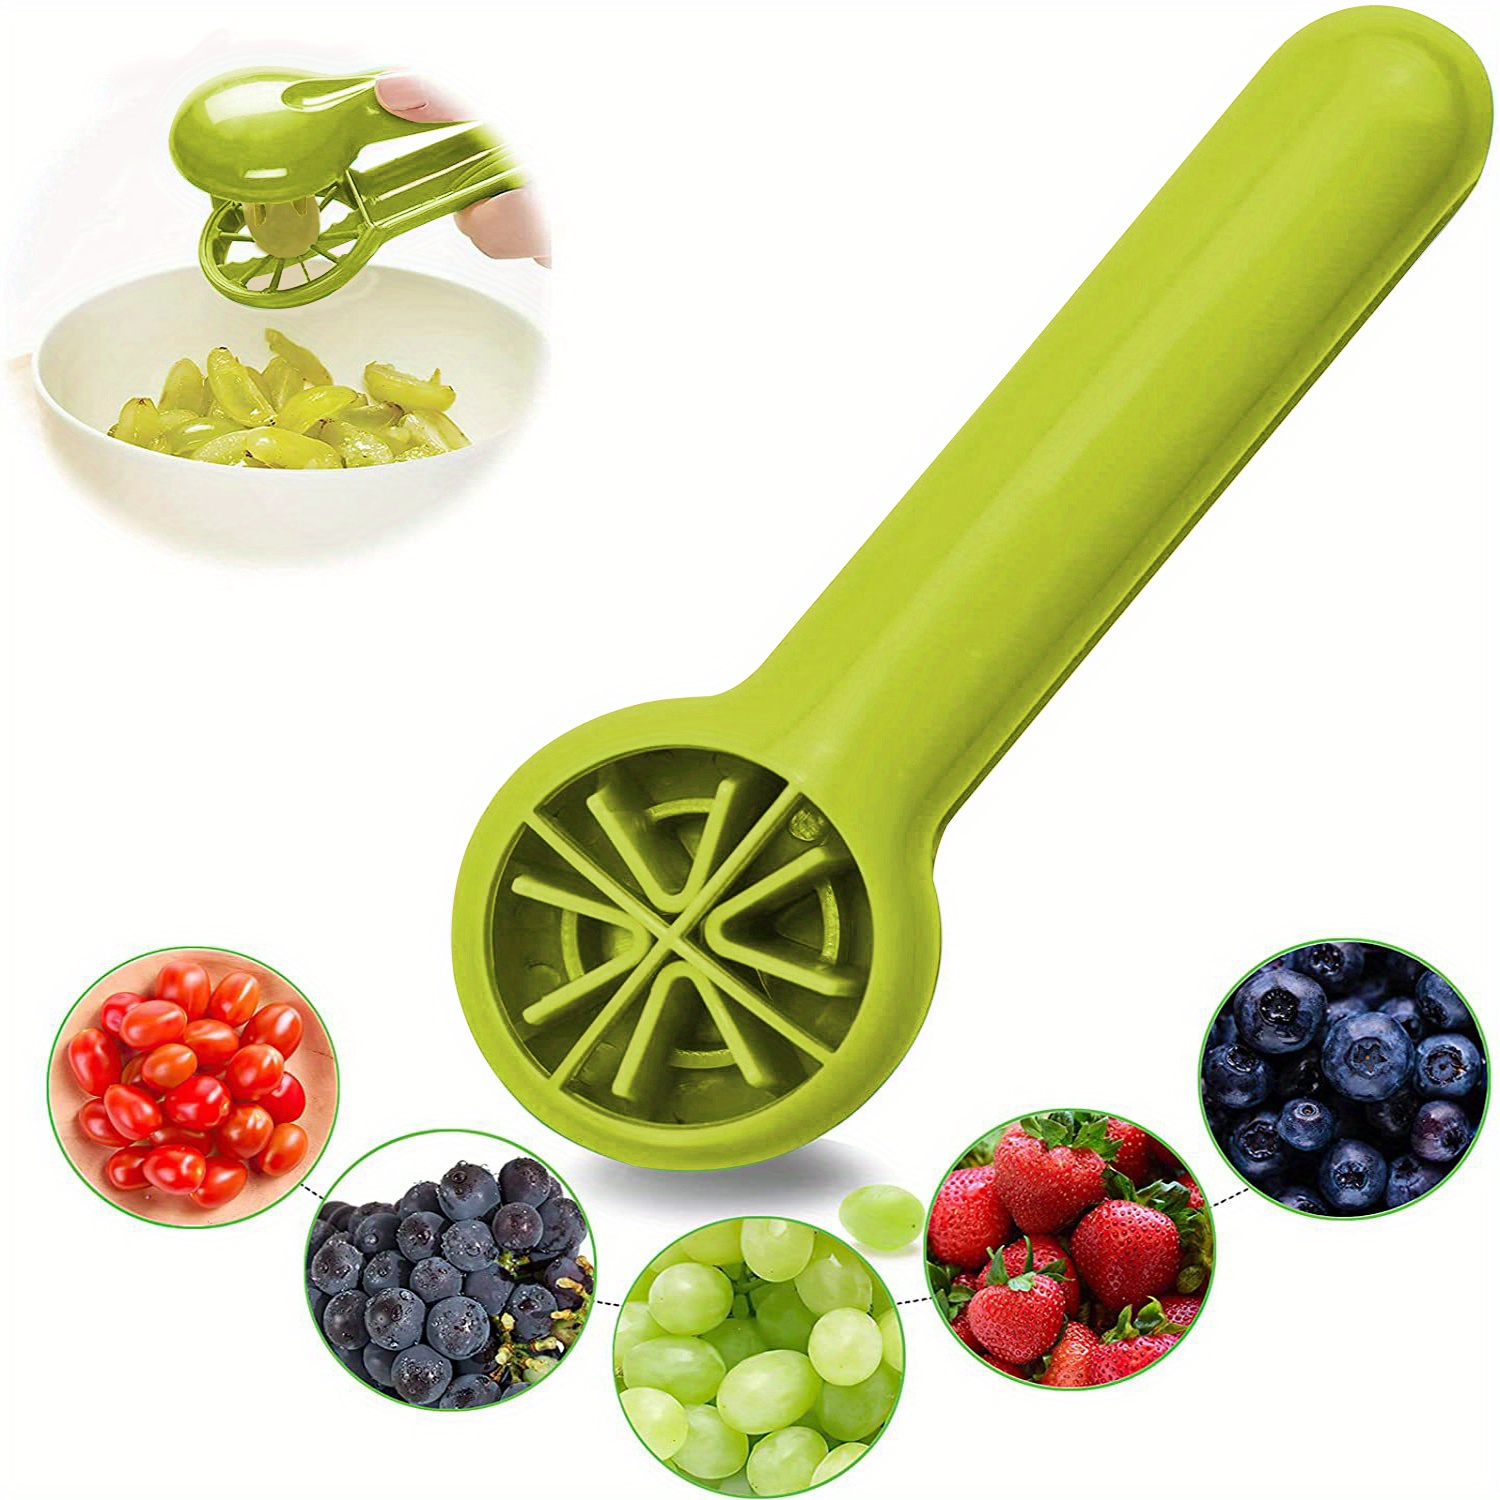  HERLLY Grape Slicer,Daily Fruit and Veggie Divider,Fruit Cutters  with Stainless Steel Blades,Grape Cutter for Baby Supplement (Green): Home  & Kitchen